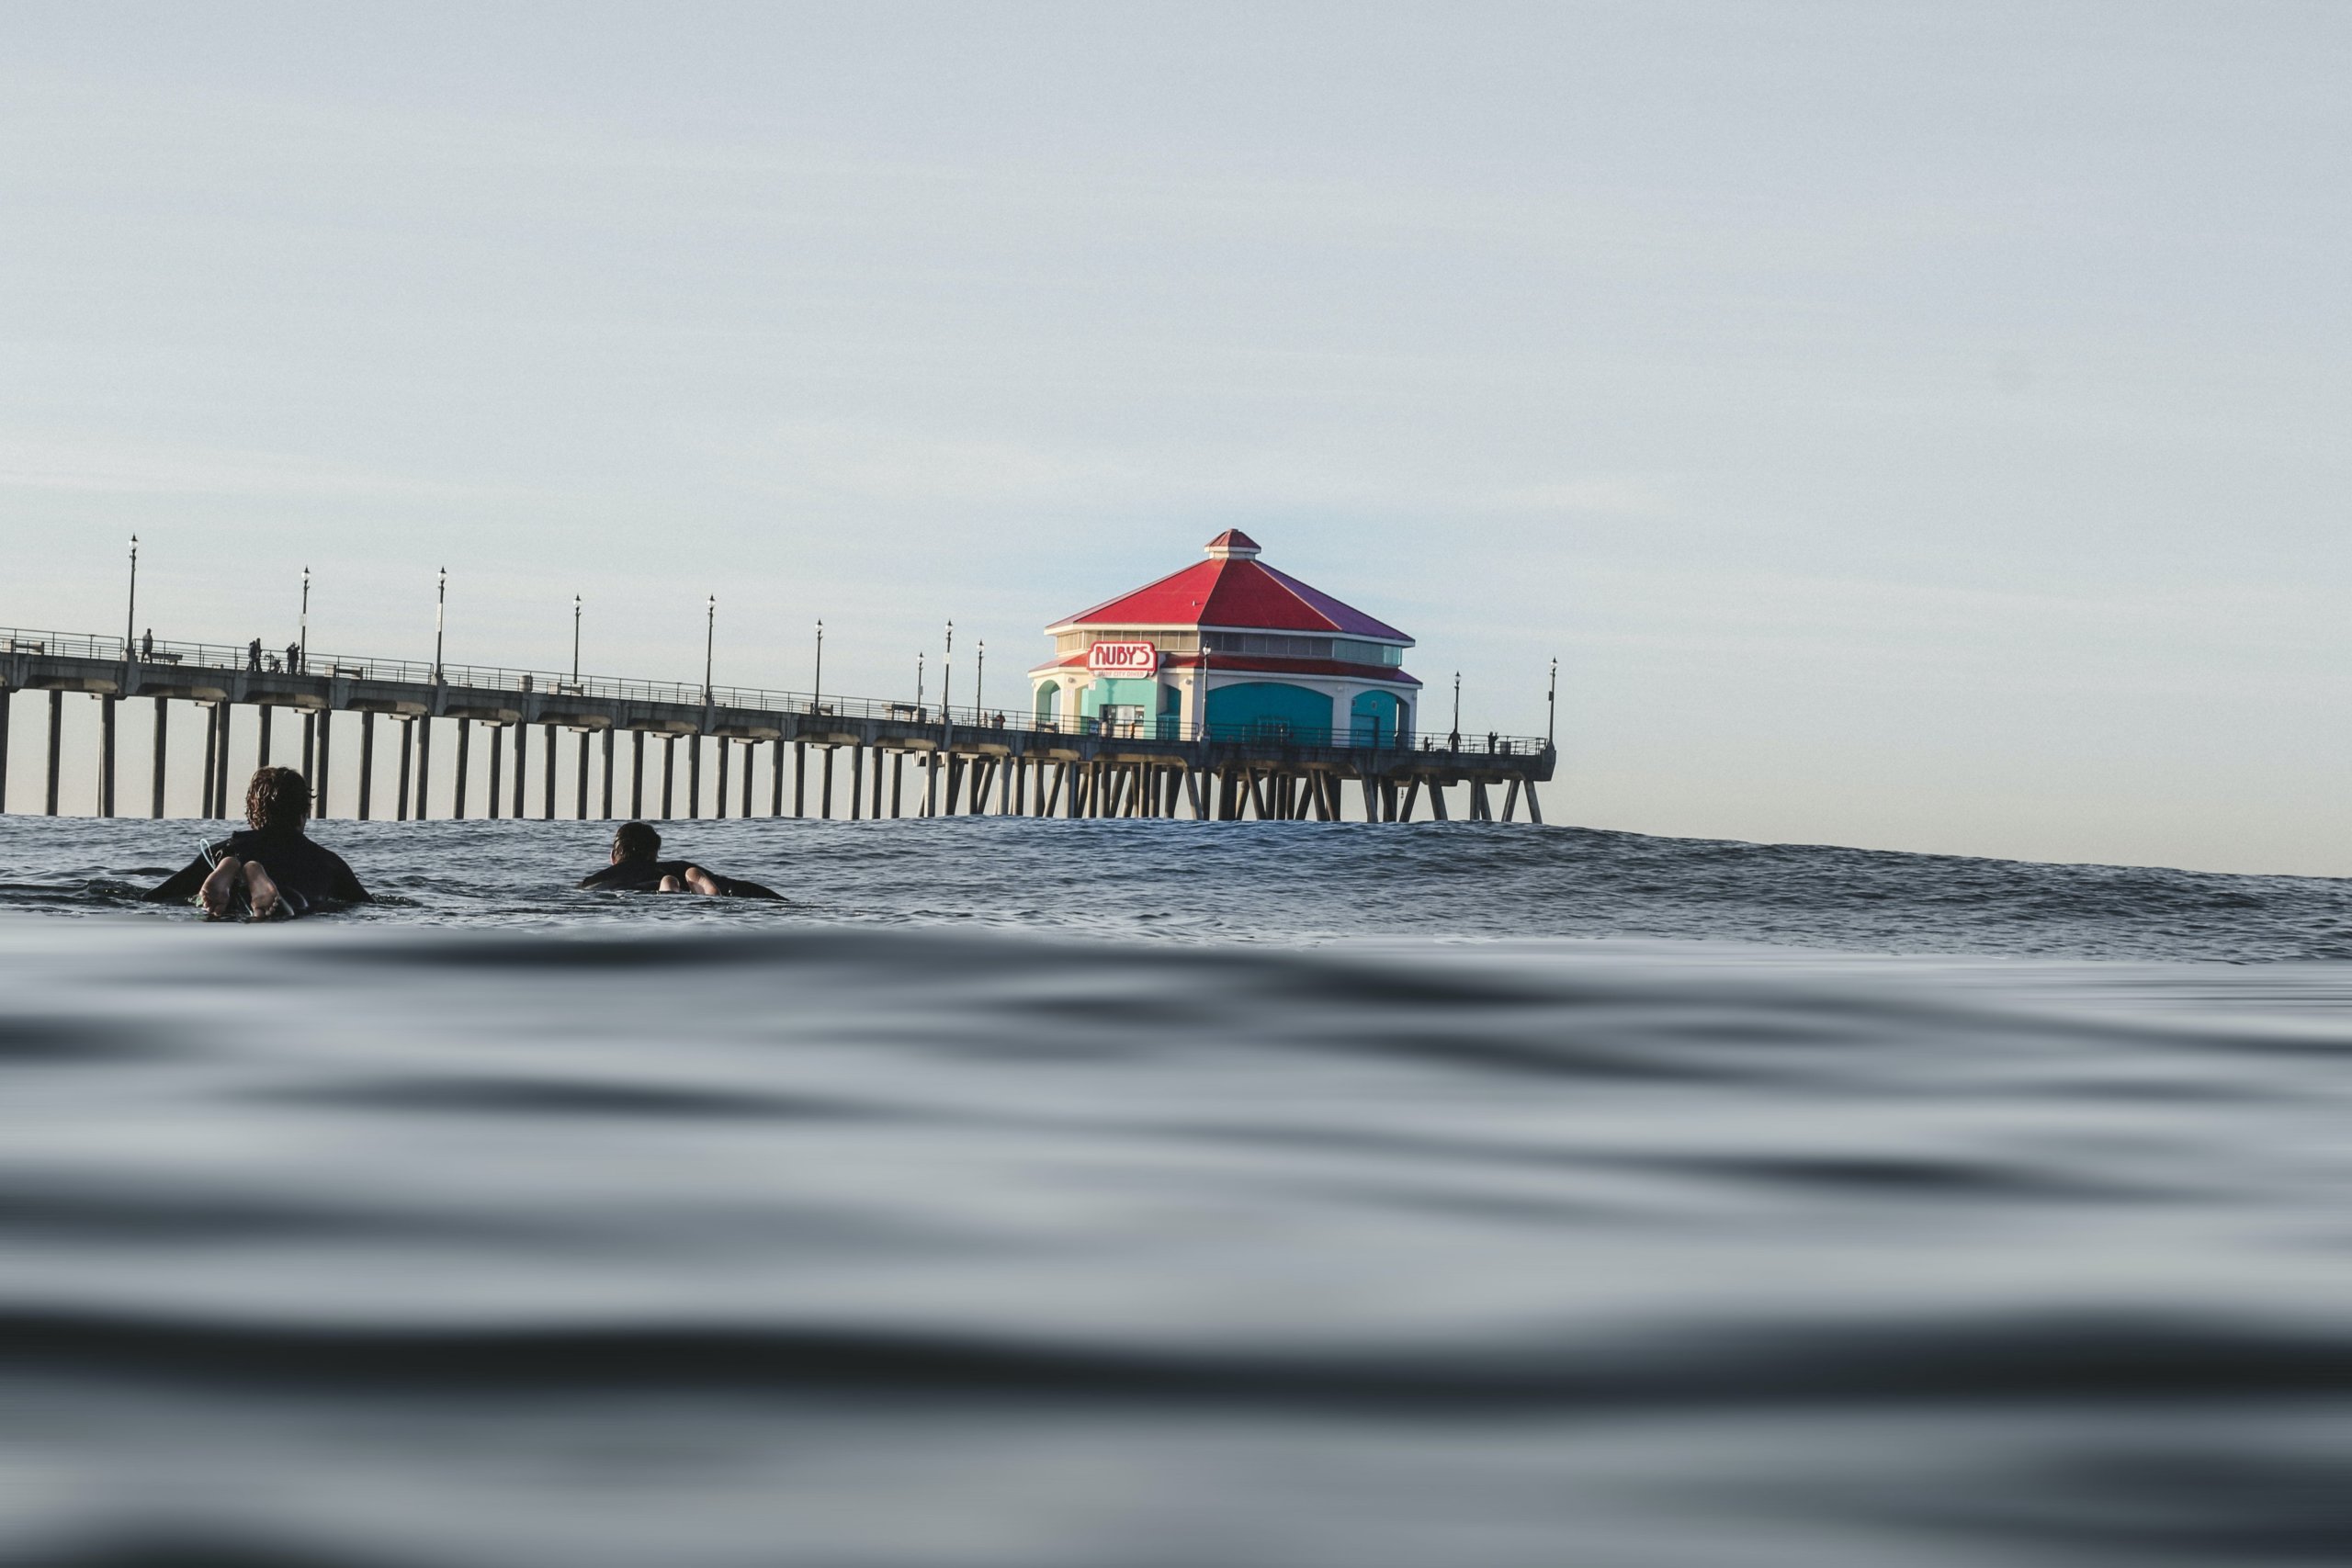 Ocean pier with surfer in foreground